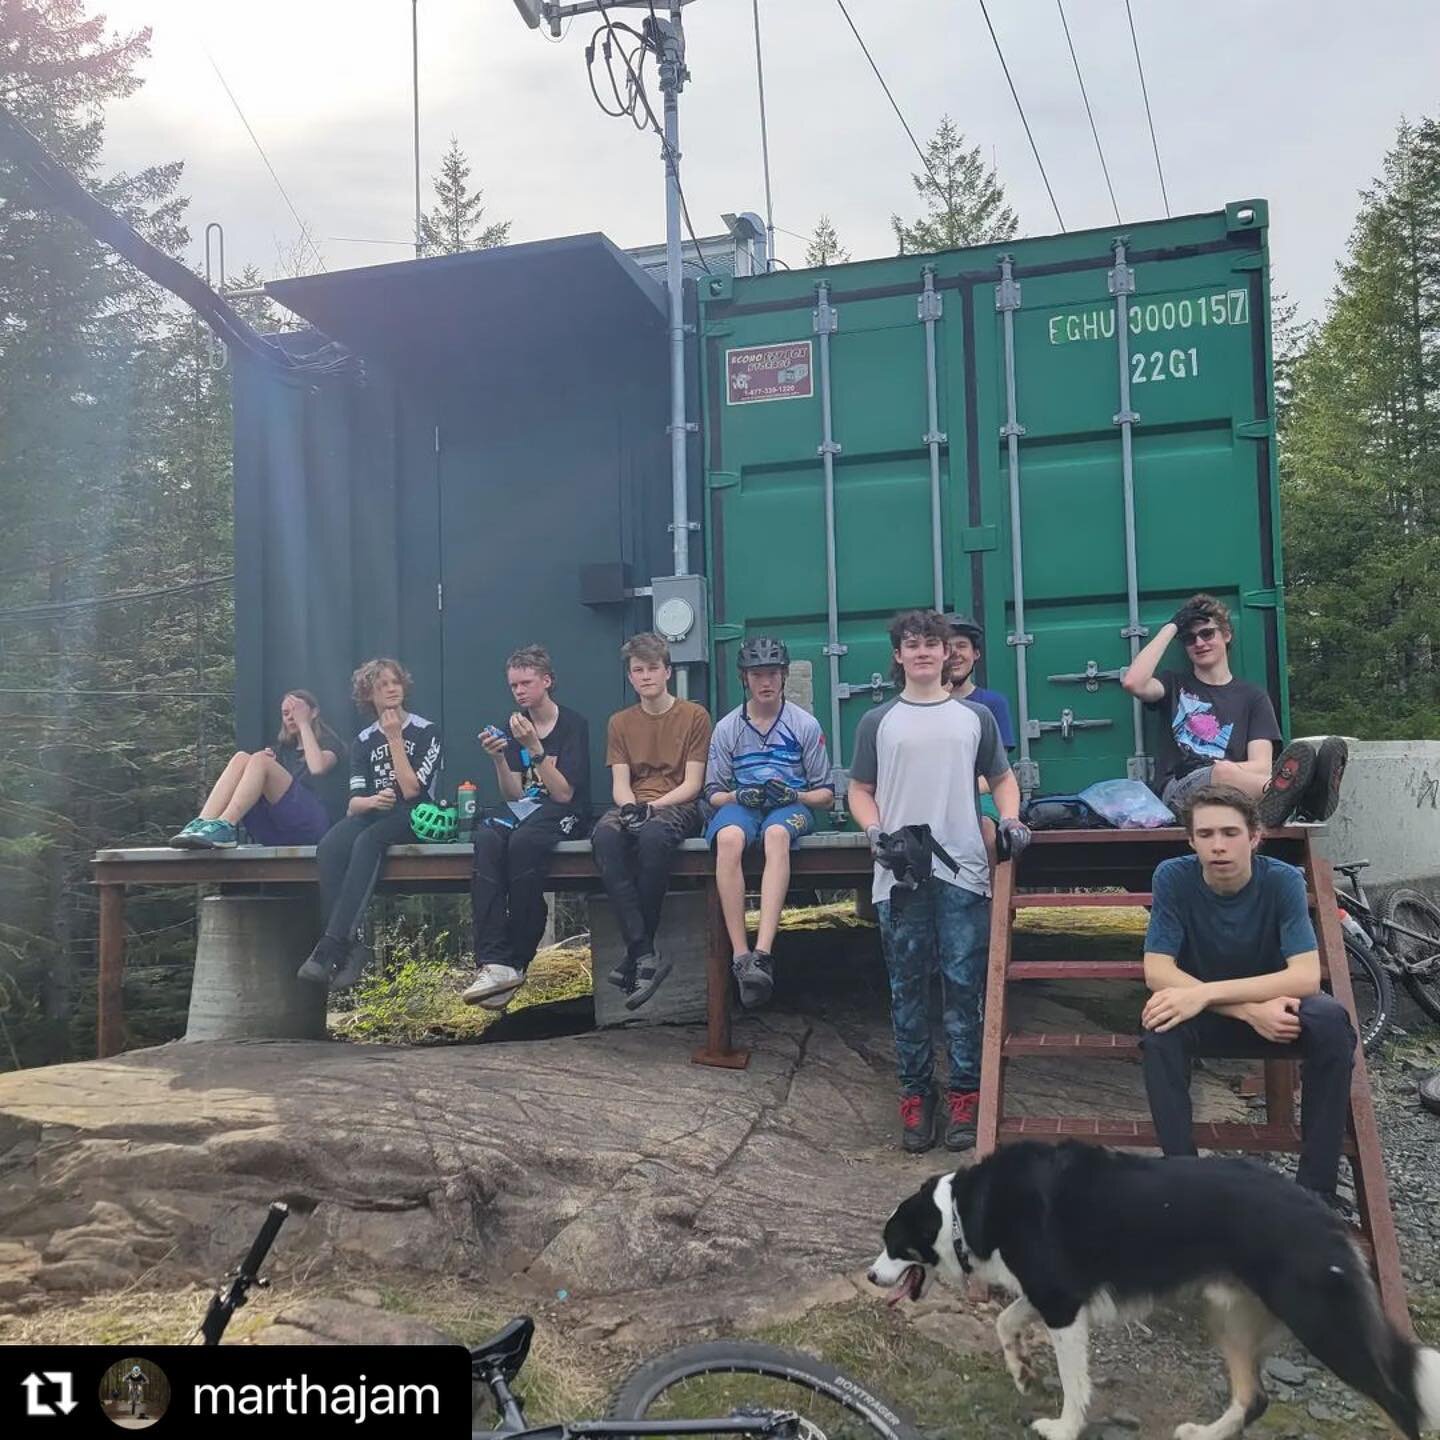 #Repost @marthajam with @use.repost
・・・
These kids rock. Technical ride this week on #radarhill
They rode EVERYTHING I threw at them. Each one of them. Best part of riding with this crew (other than the camaraderie and FUN) is watching them progress 